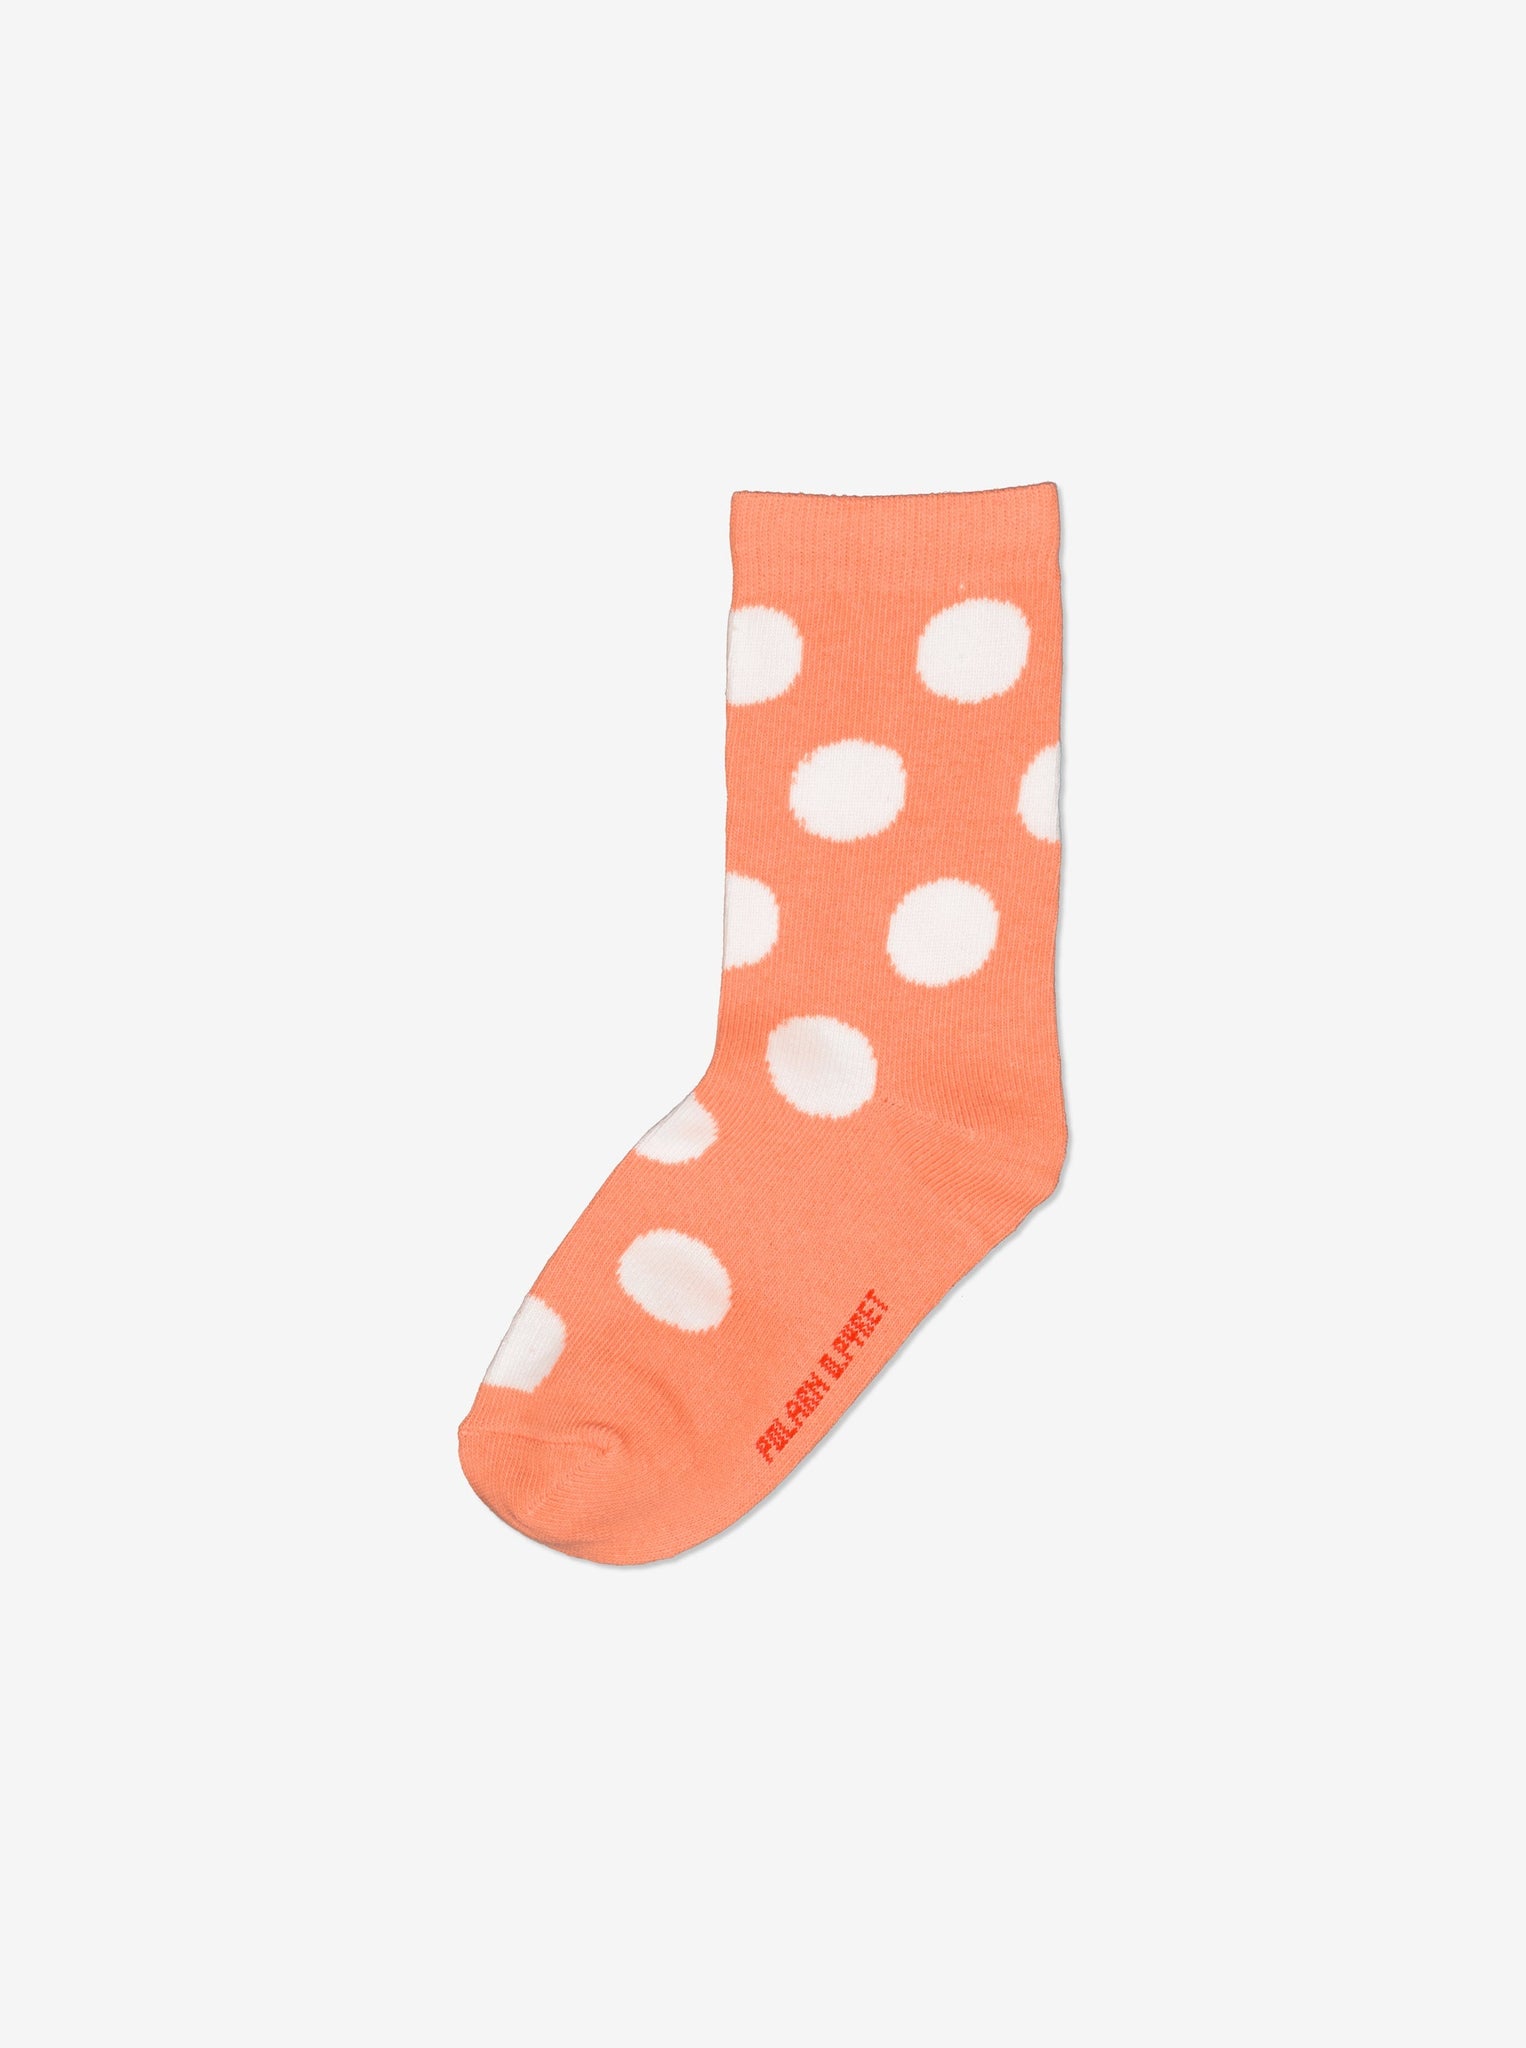  Coral Kids Socks Multipack from Polarn O. Pyret Kidswear. Made using environmentally friendly materials.